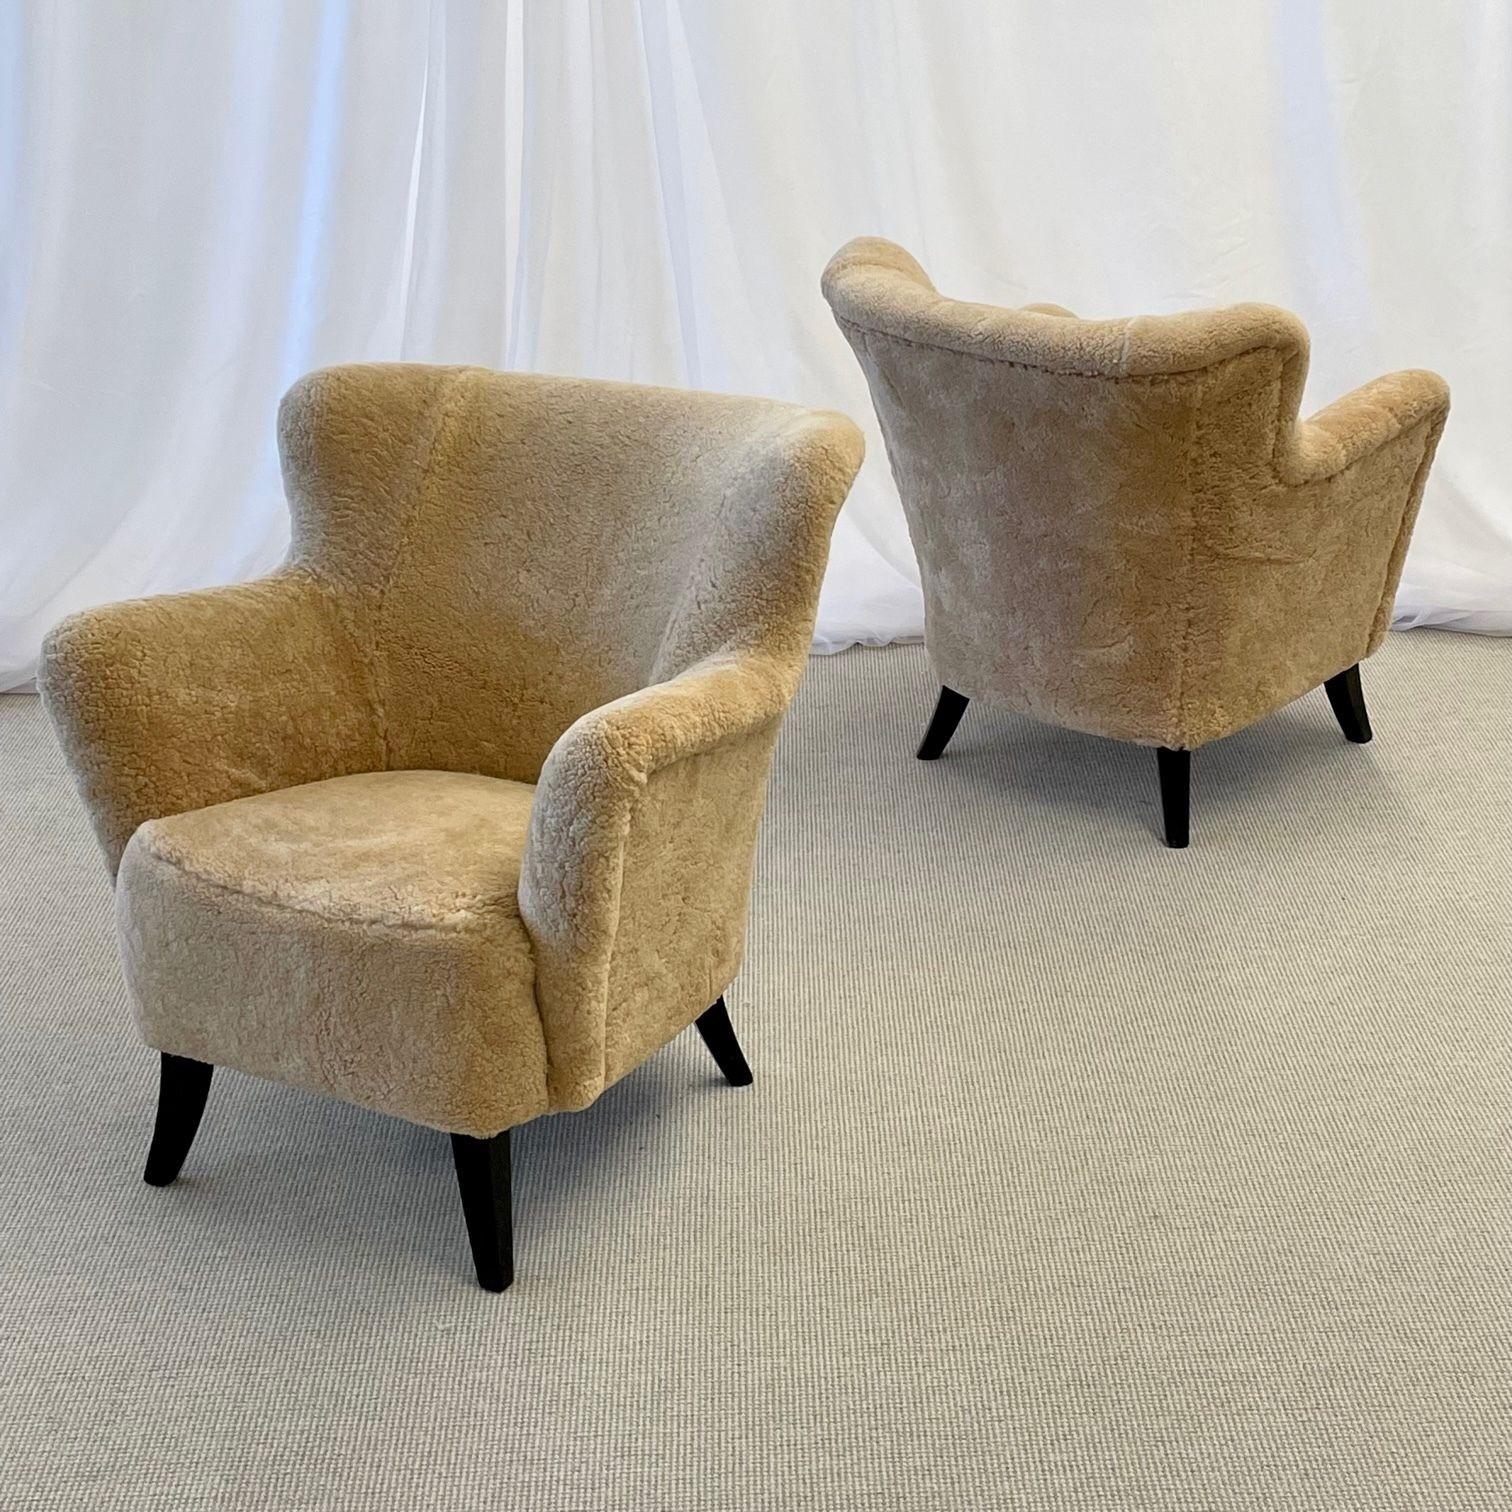 Danish Mid-Century Modern, Shearling Lounge Chairs, Sheepskin, Ebonized Wood, 1950s

Pair of organic form lounge chairs designed and produced in Denmark circa 1950s. The uppers feature freeflowing curves and organic form. Each chair sits on four